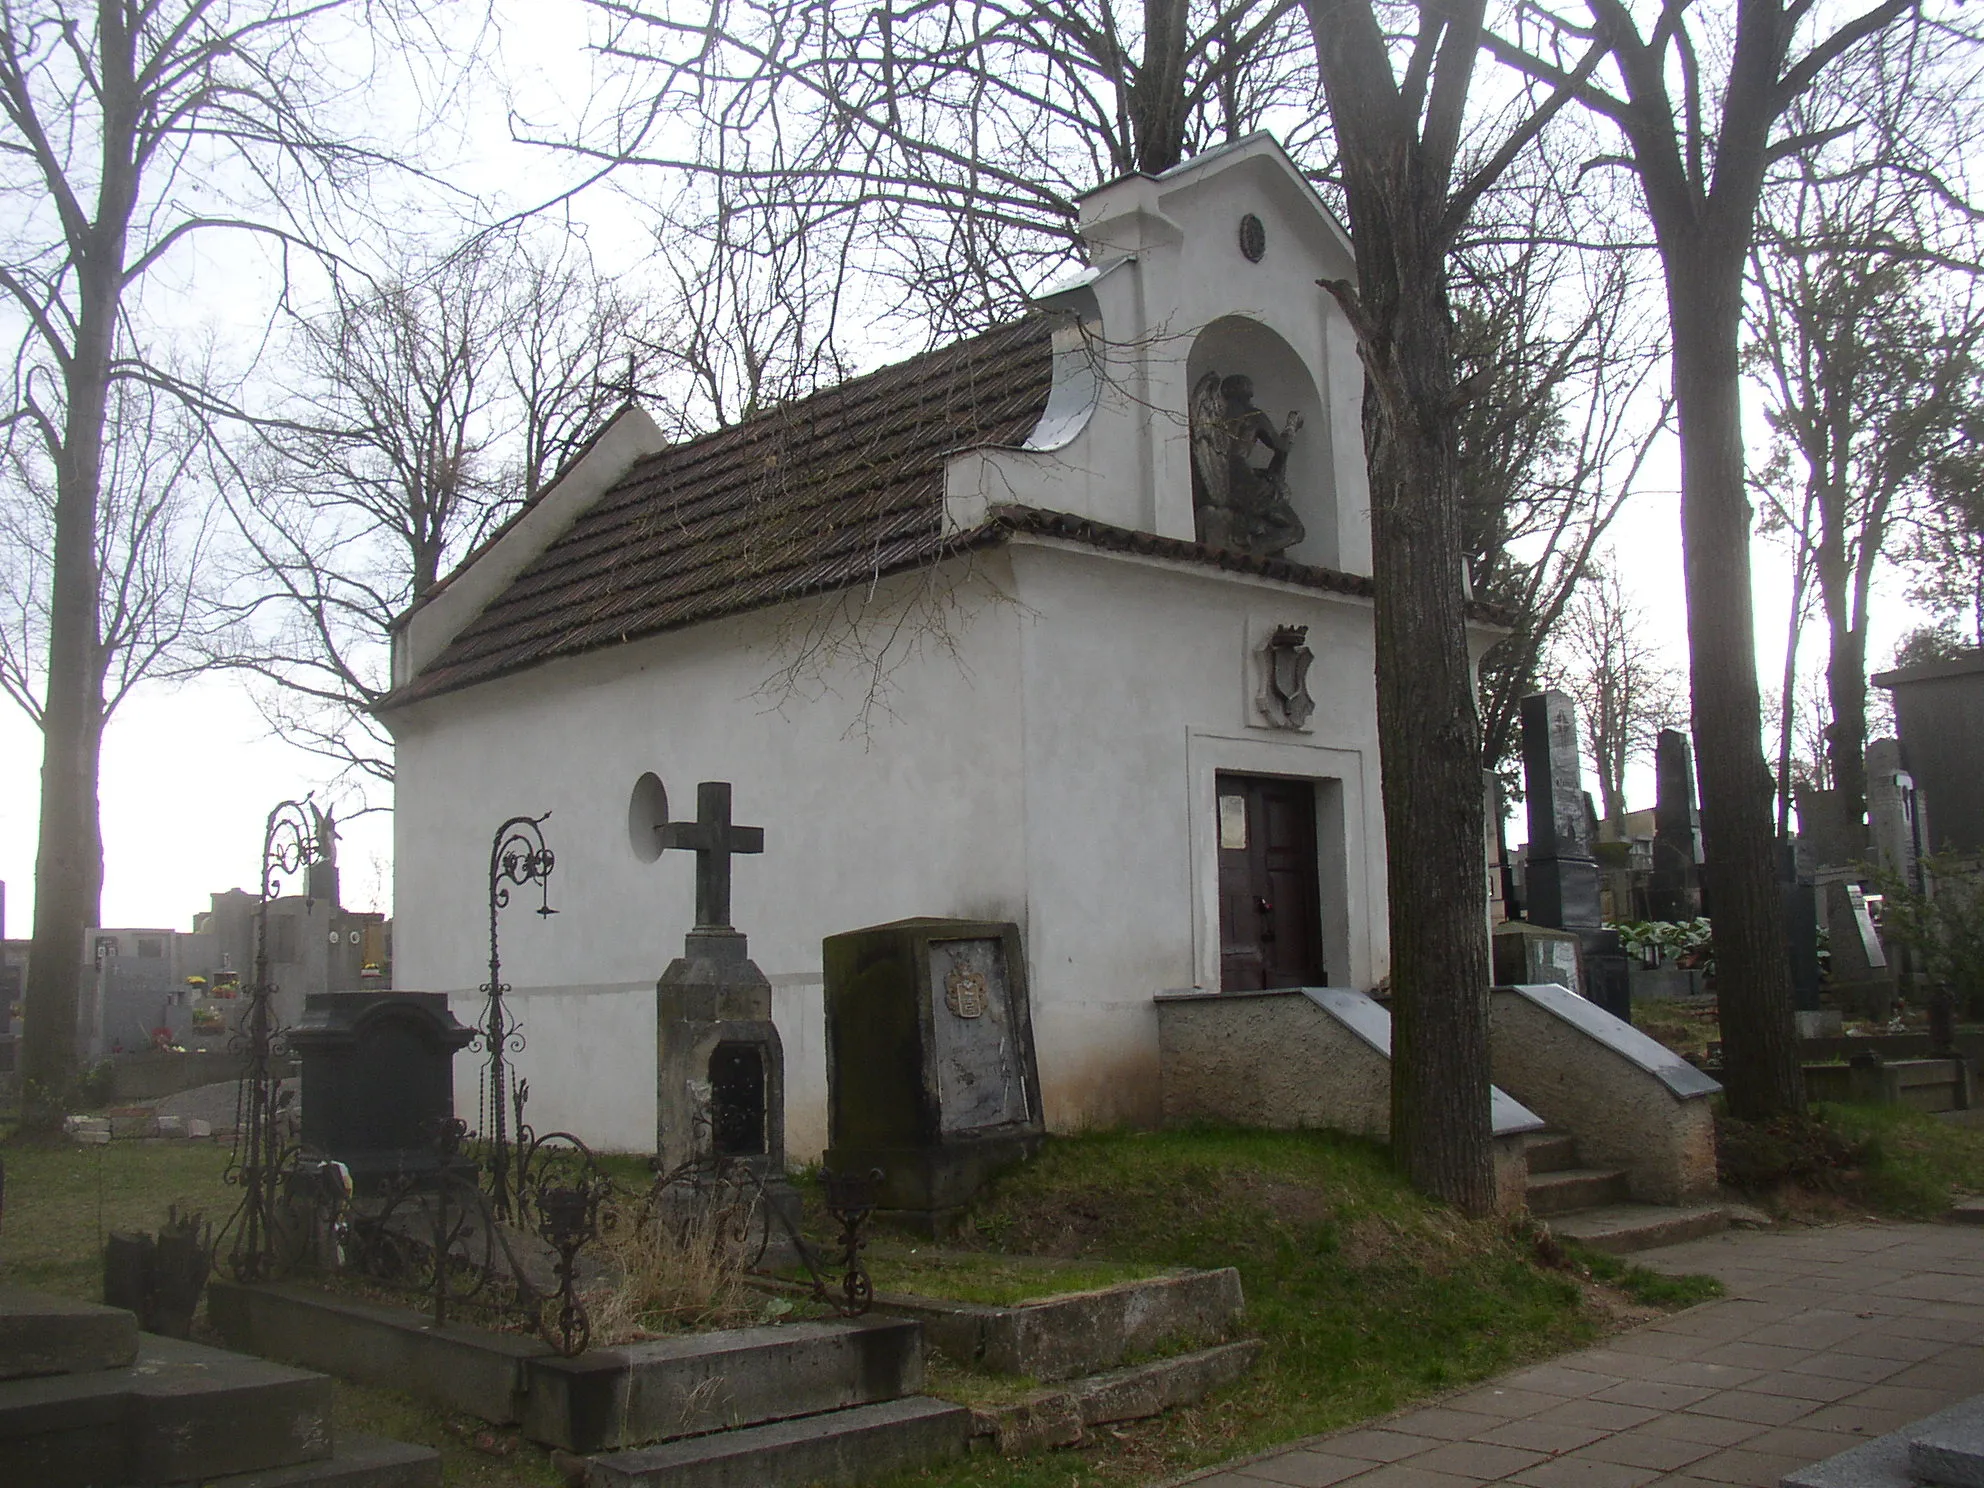 Photo showing: Koleč, Kladno District, Czech Republic. Tomb at local cemetery. Built for Ubelli family in 1793, adapted by their successors Bohuš of Otěšice in 1818. The front bears arms of Bohuš family.